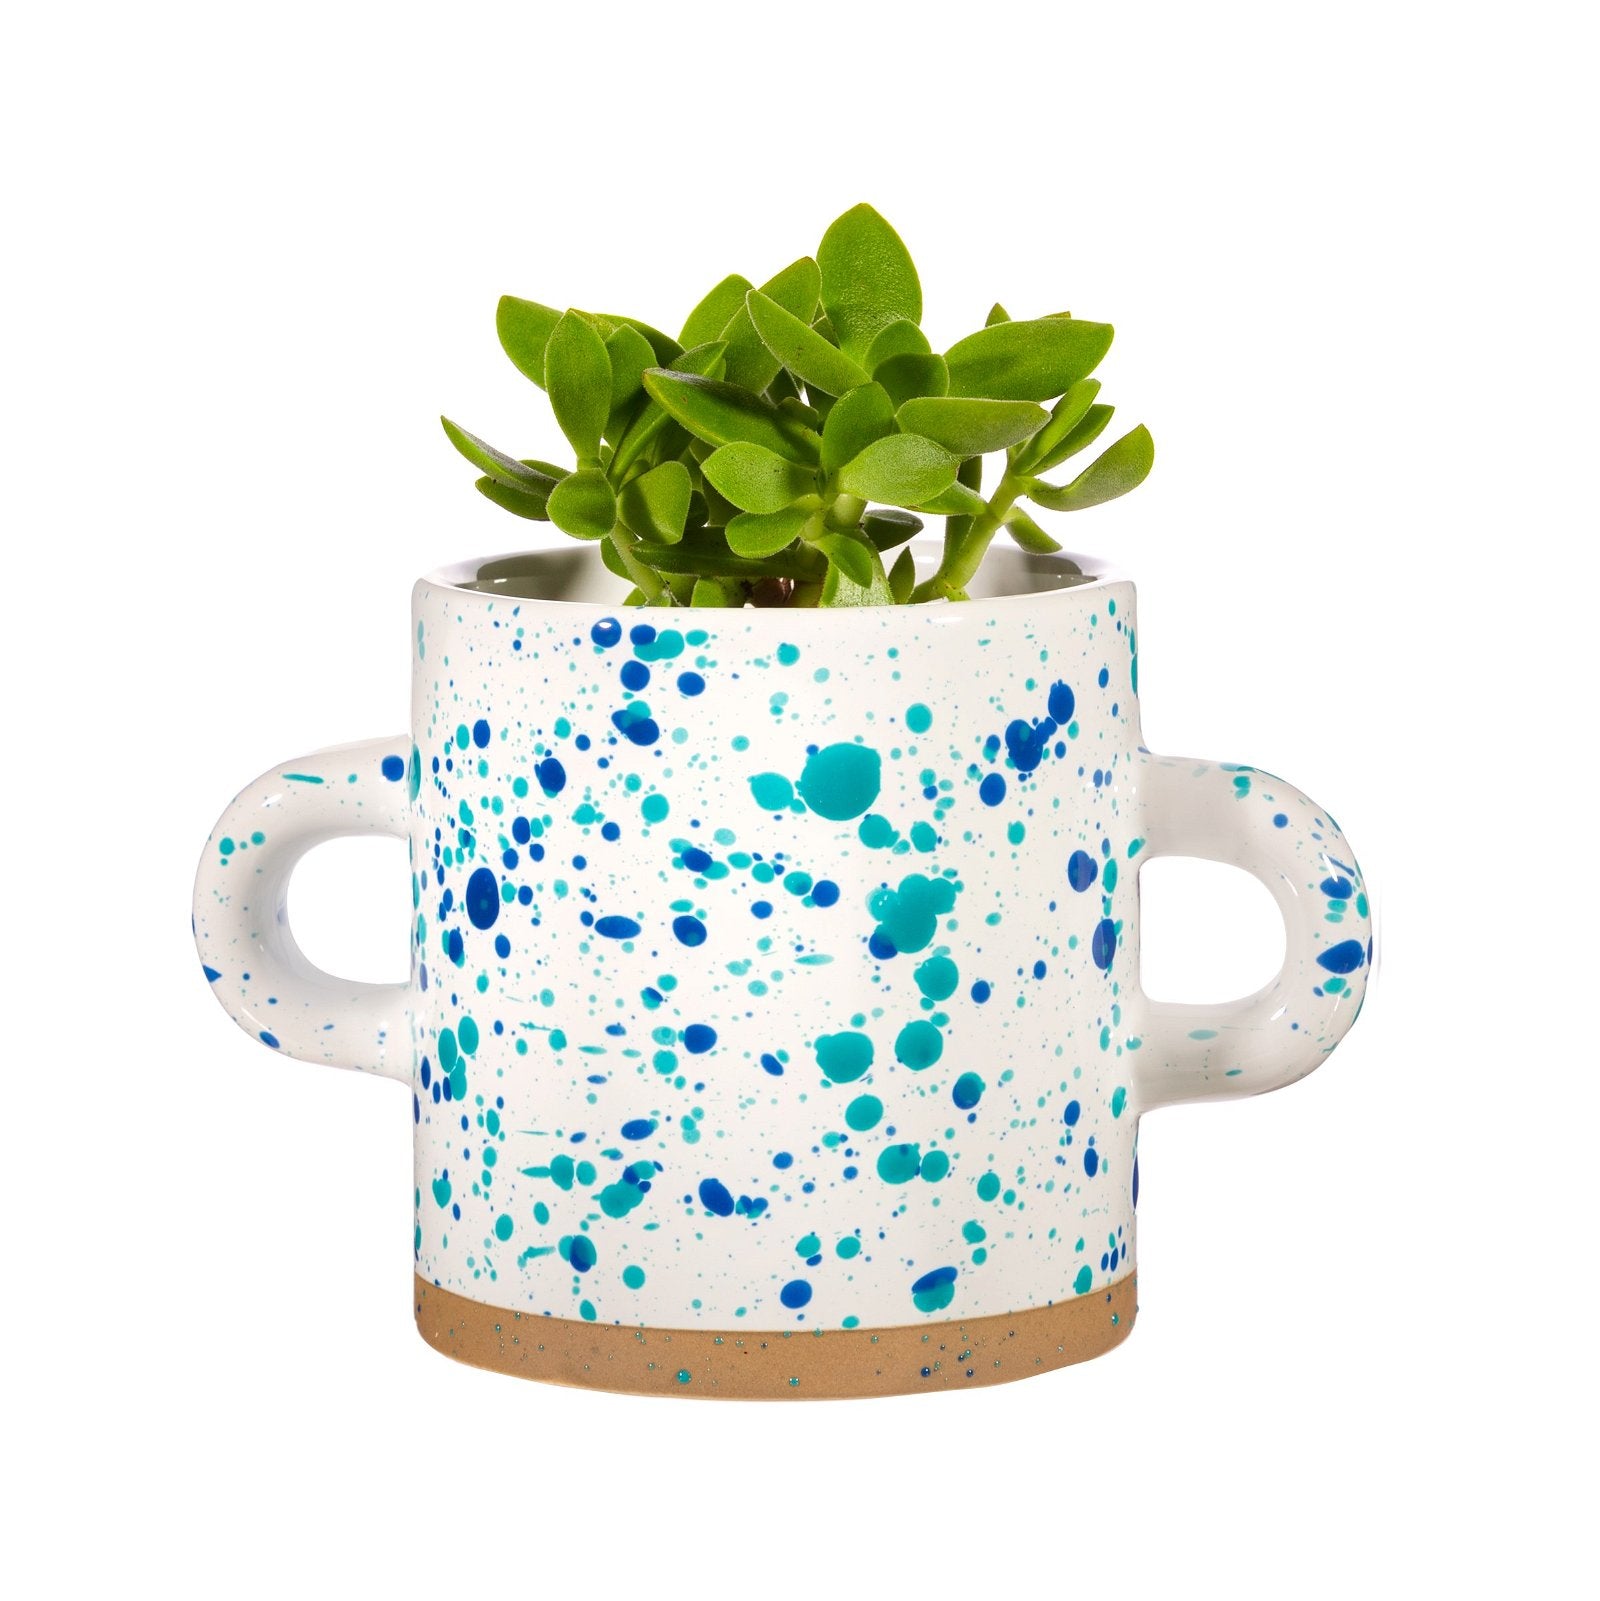 View Turquoise and Blue Splatterware Planter information